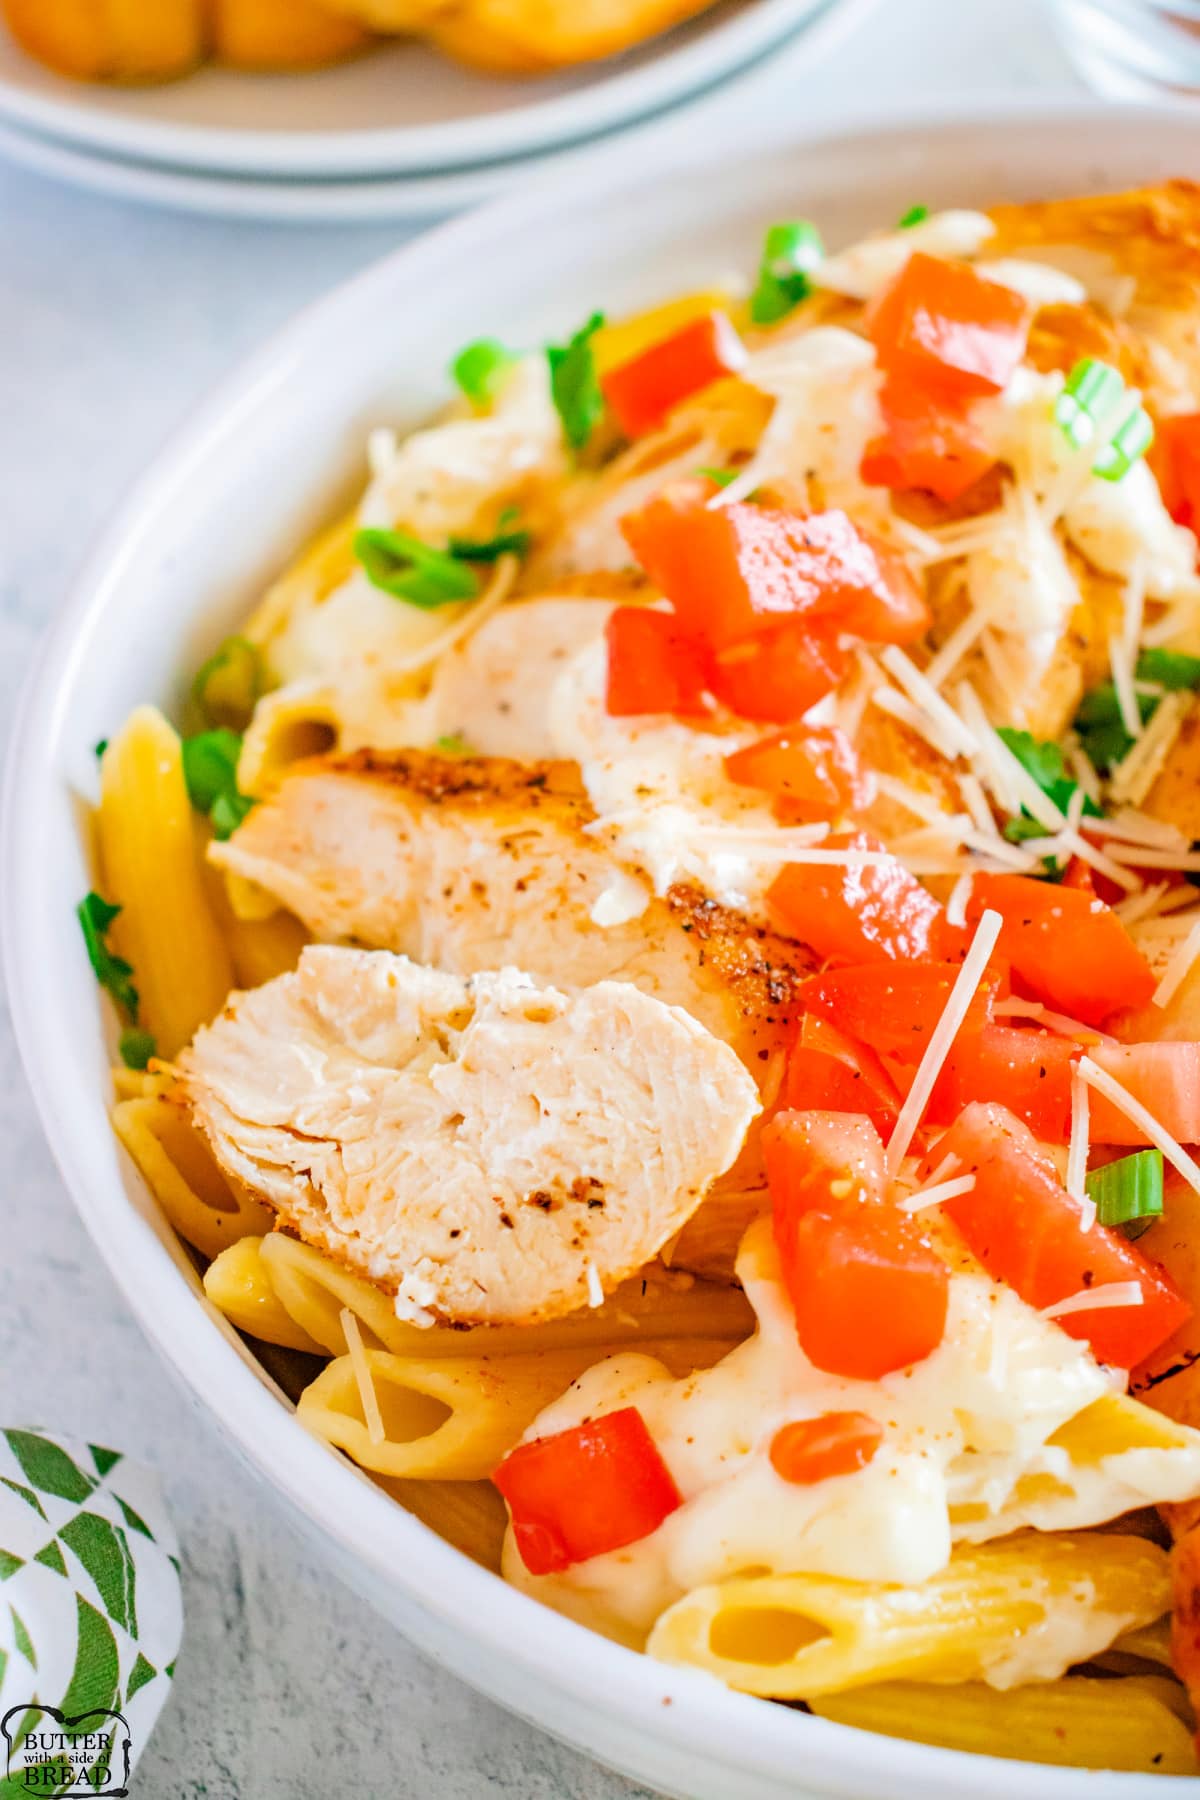 Copycat Chili's Cajun Chicken Pasta is the perfect dinner recipe that only takes 30 minutes to make. Delicious pasta recipe made with perfectly seasoned chicken and a creamy sauce. 